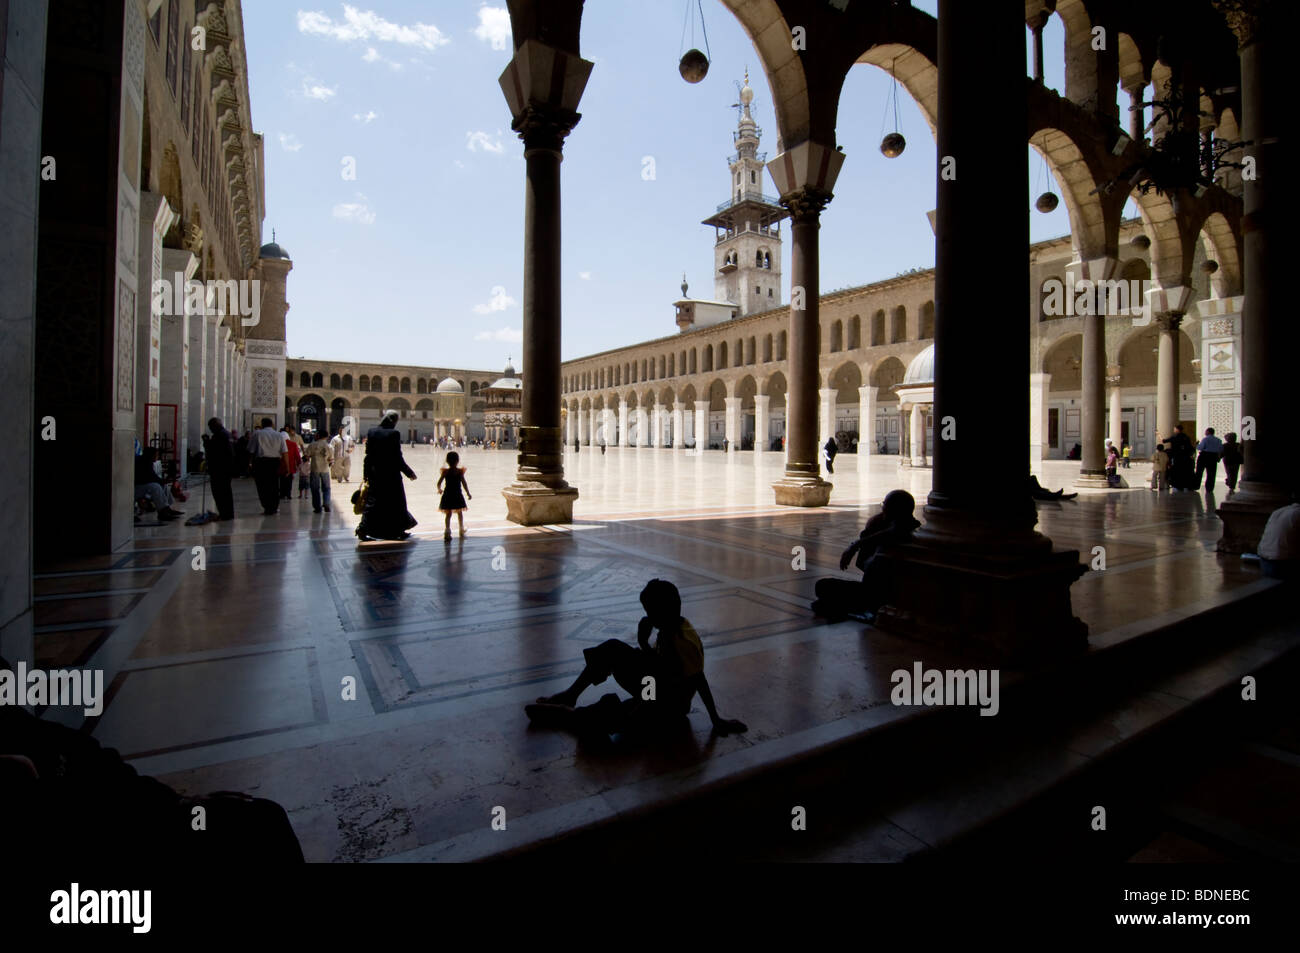 Children and families in the courtyard of the Umayyad Mosque (Grand Mosque of Damascus). Stock Photo